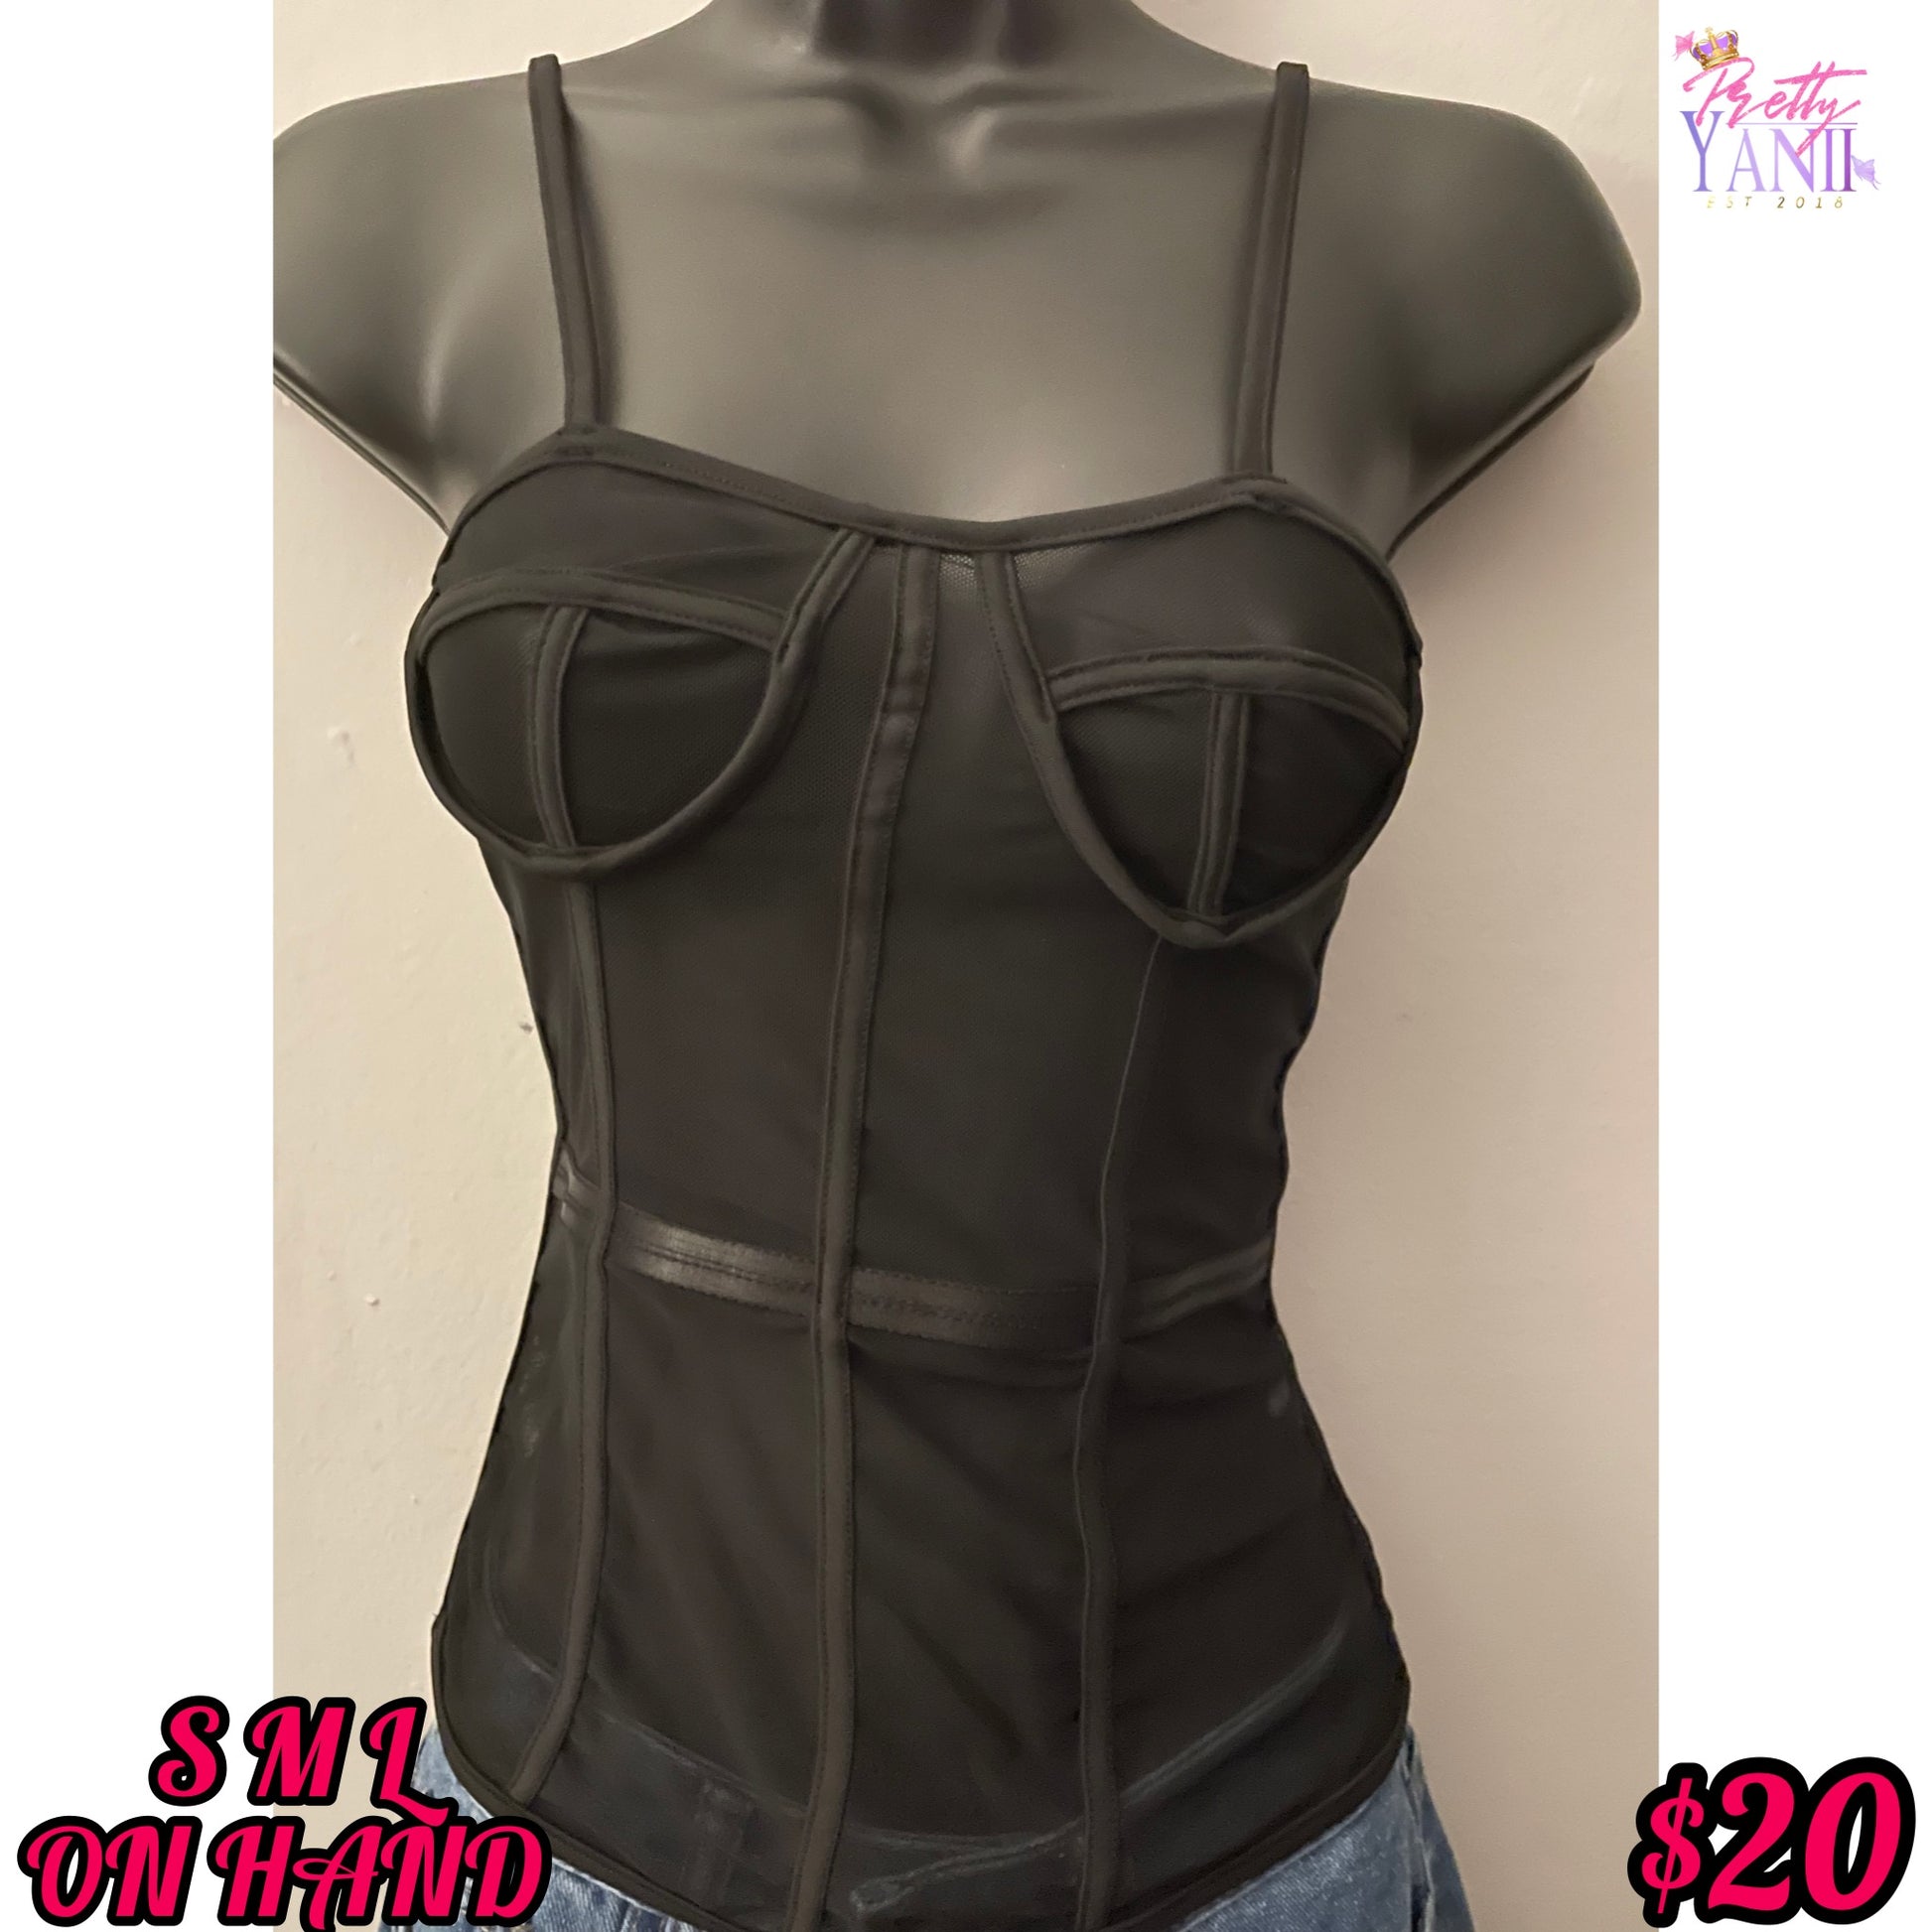 black bustier top features a stretchy see-through design